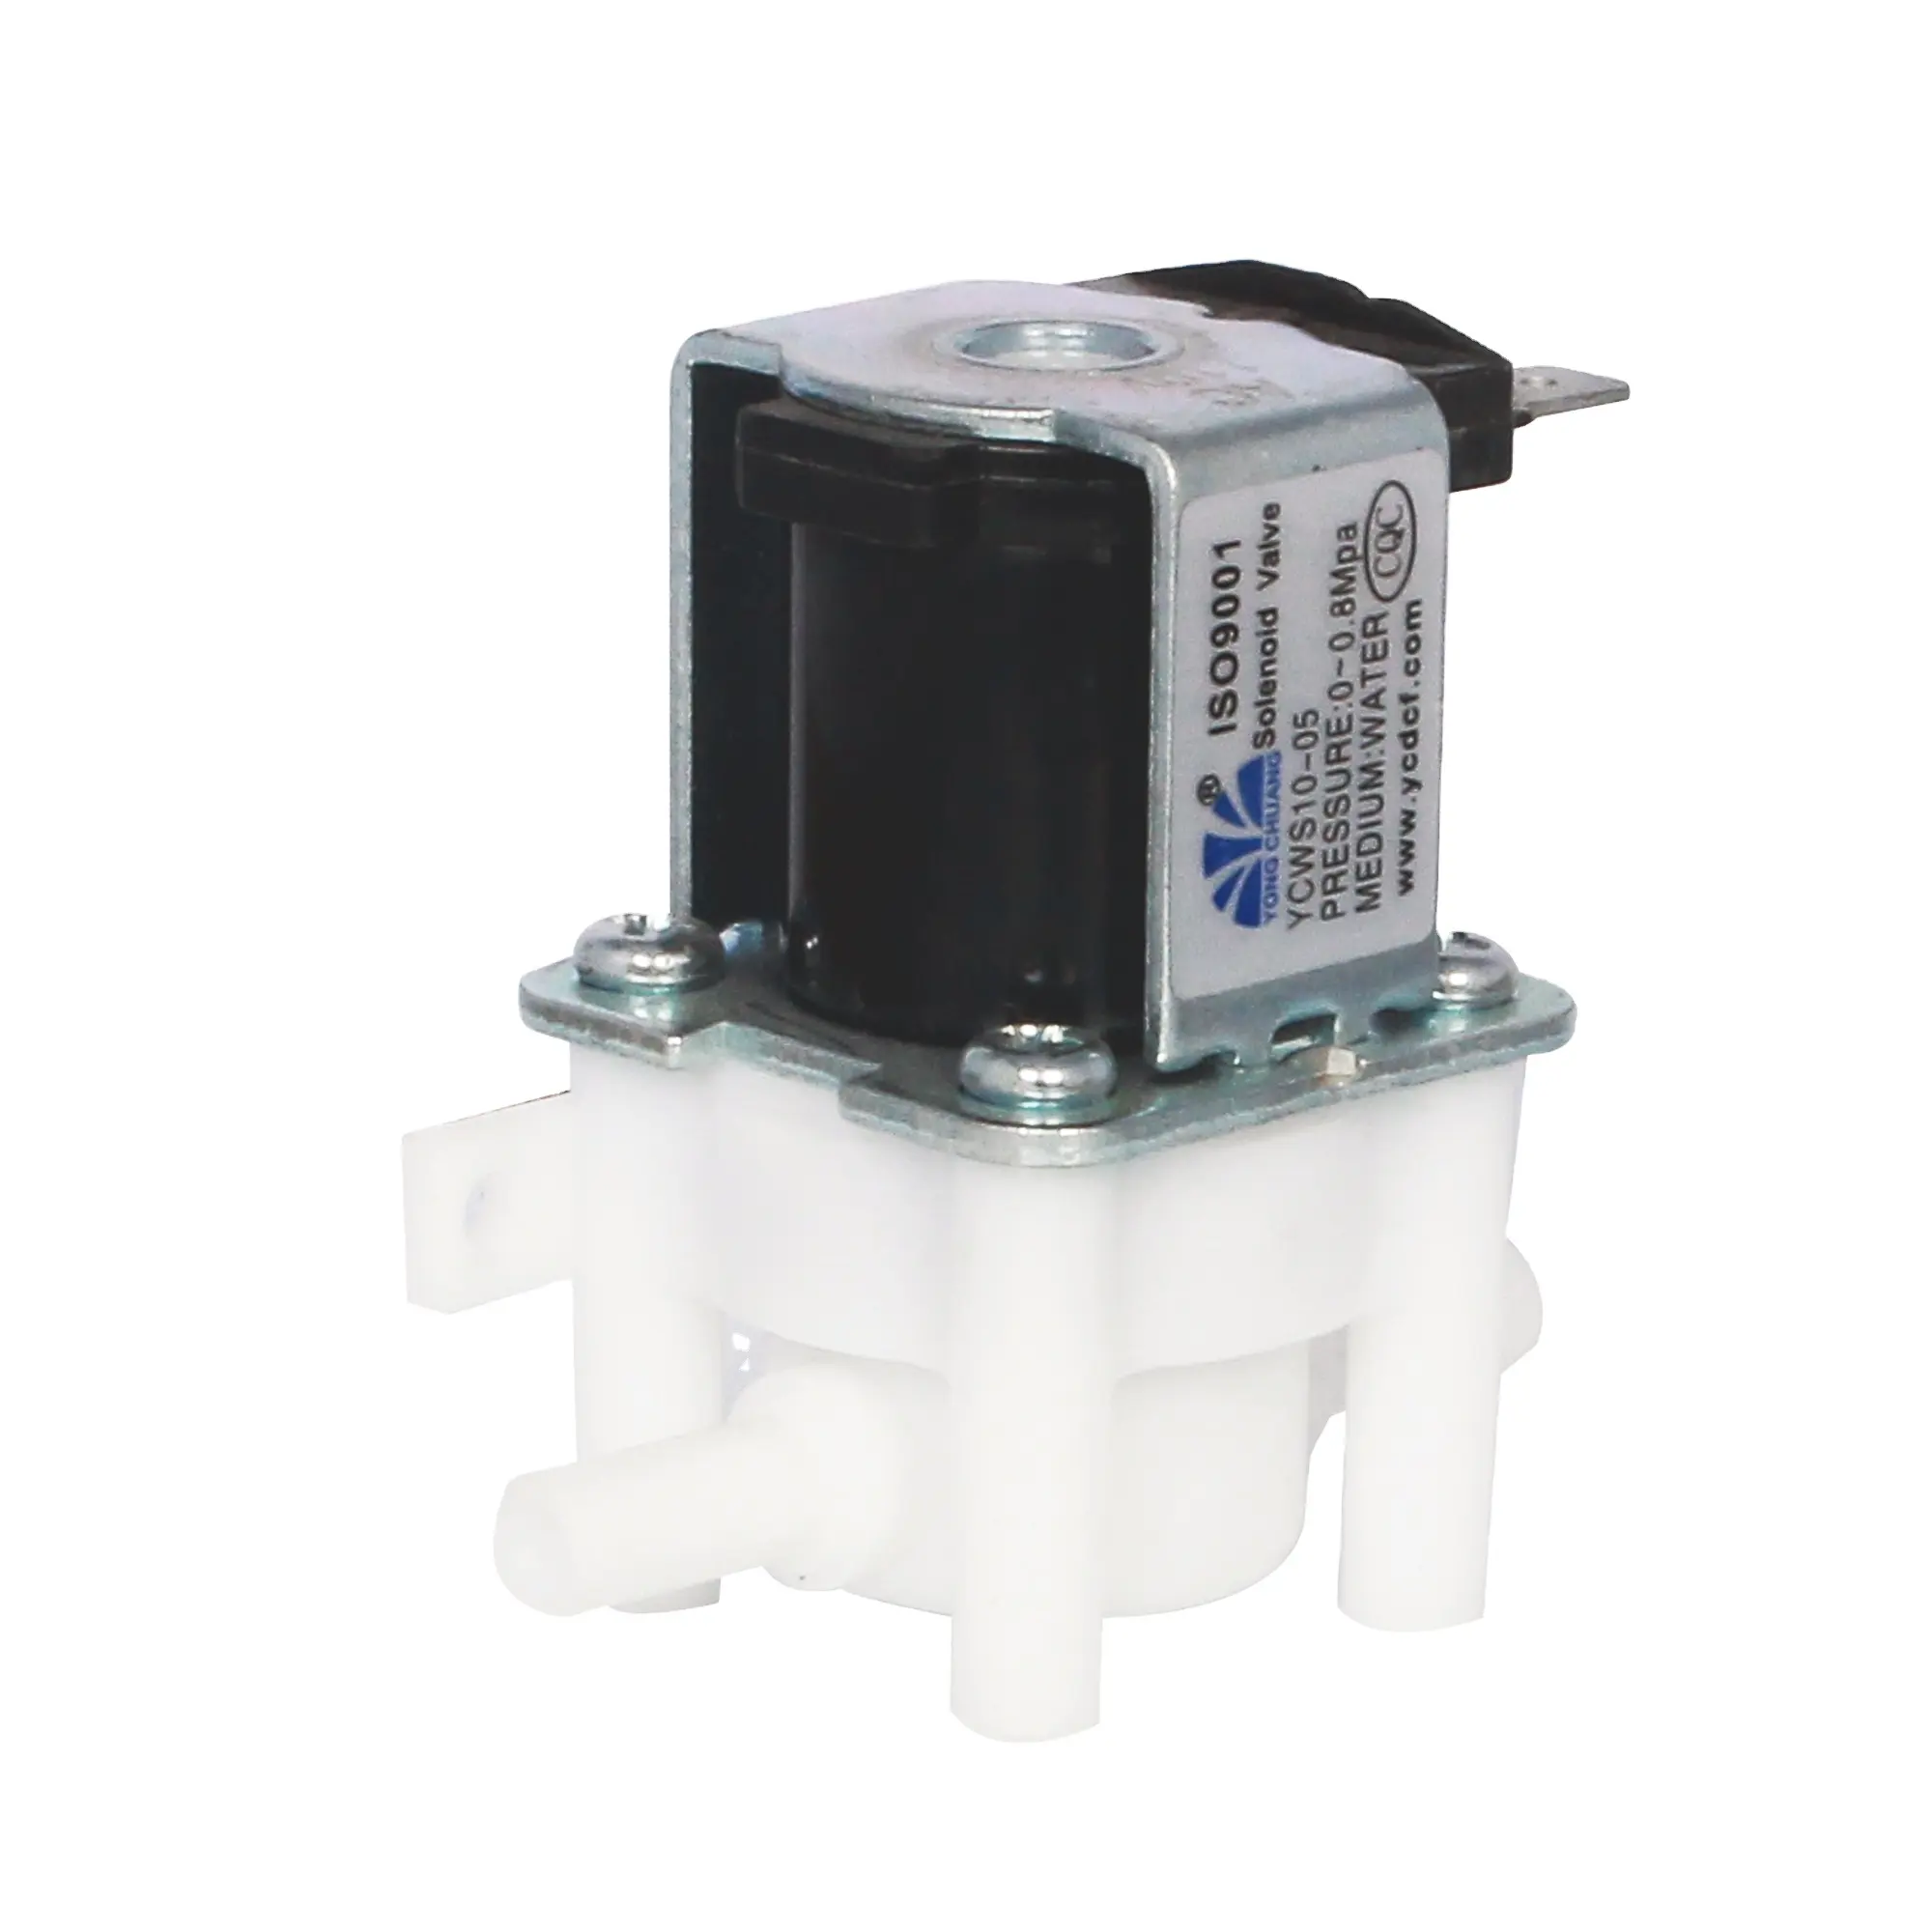 Yongchuang brand YCWS10 series plastic ro system 24v water solenoid valve for domestic ro system dc24v